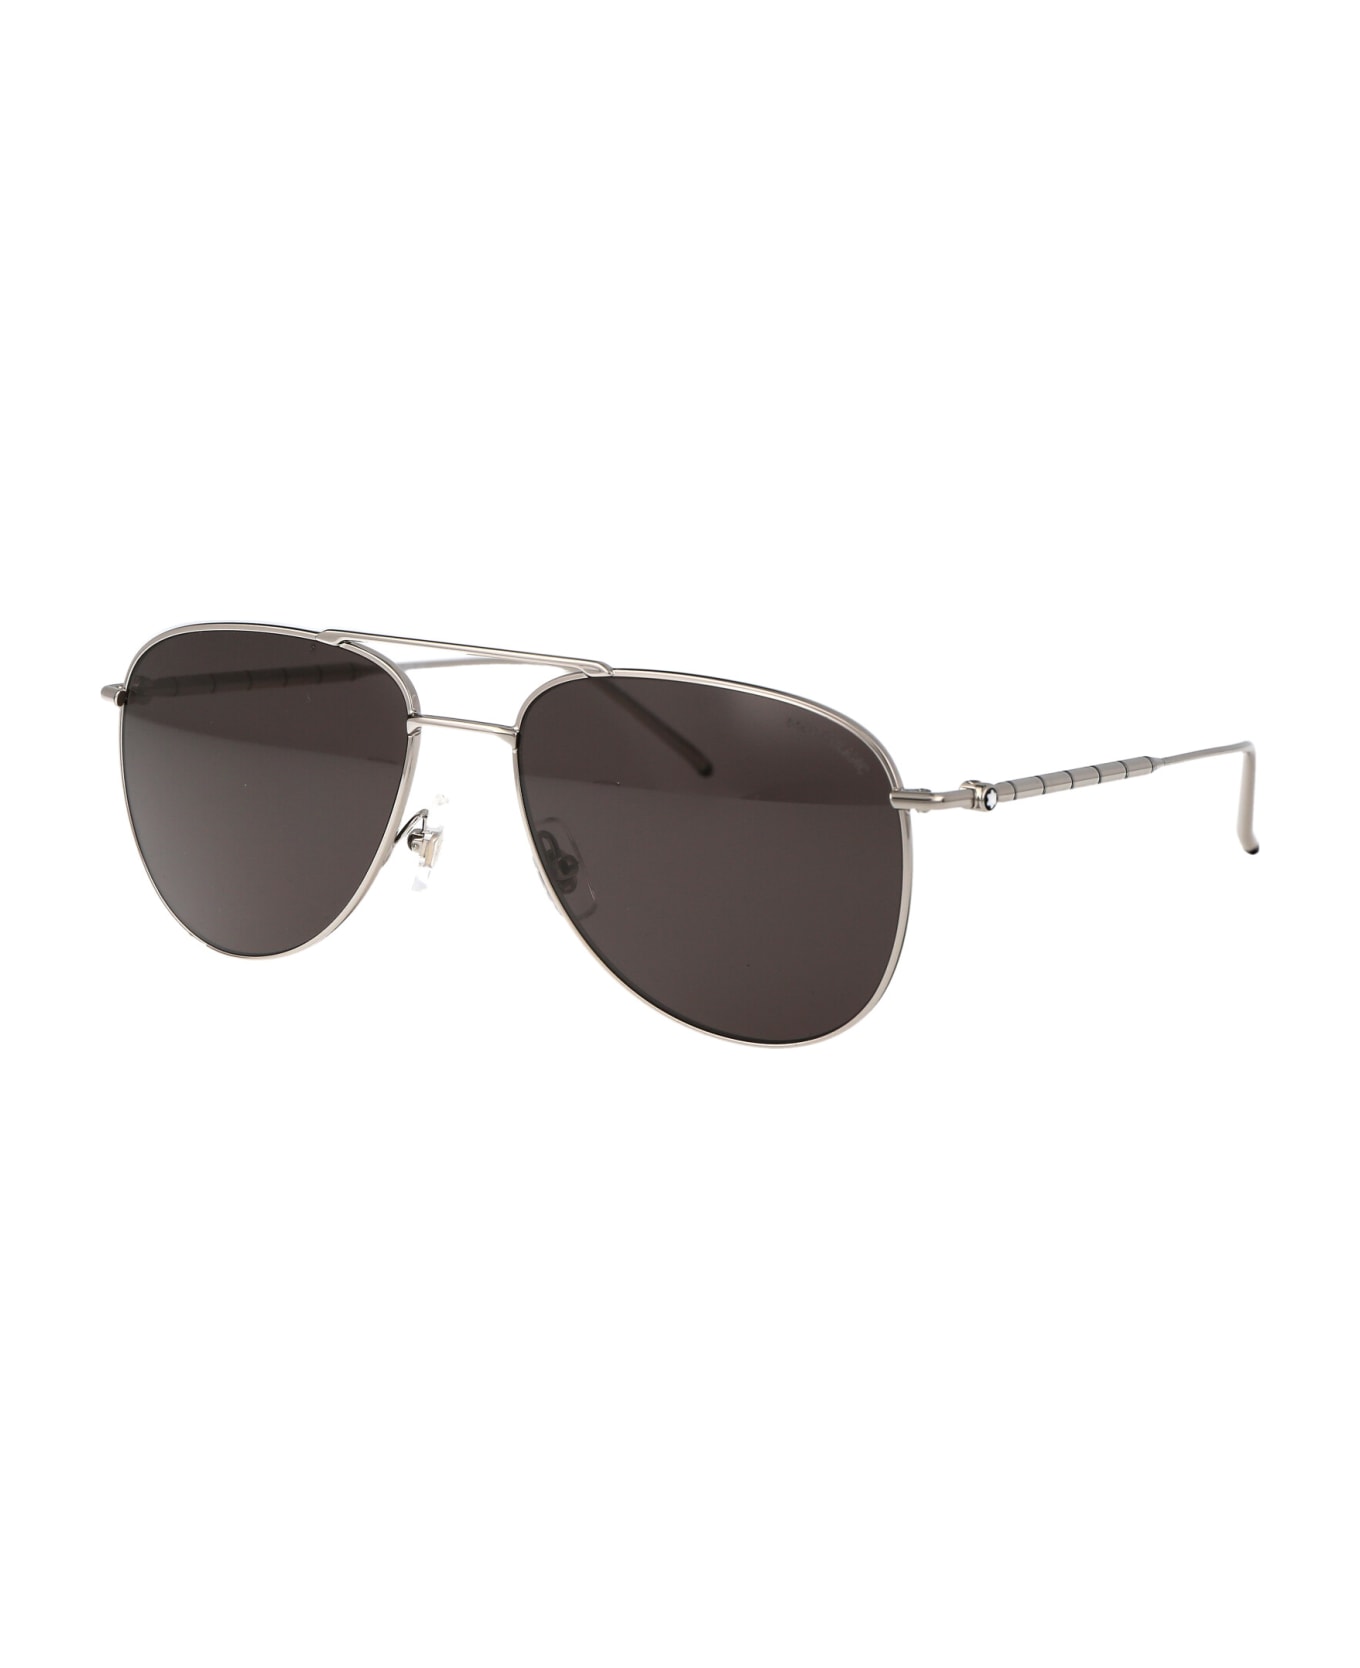 Montblanc Mb0311s Sunglasses - 001 SILVER SILVER GREY